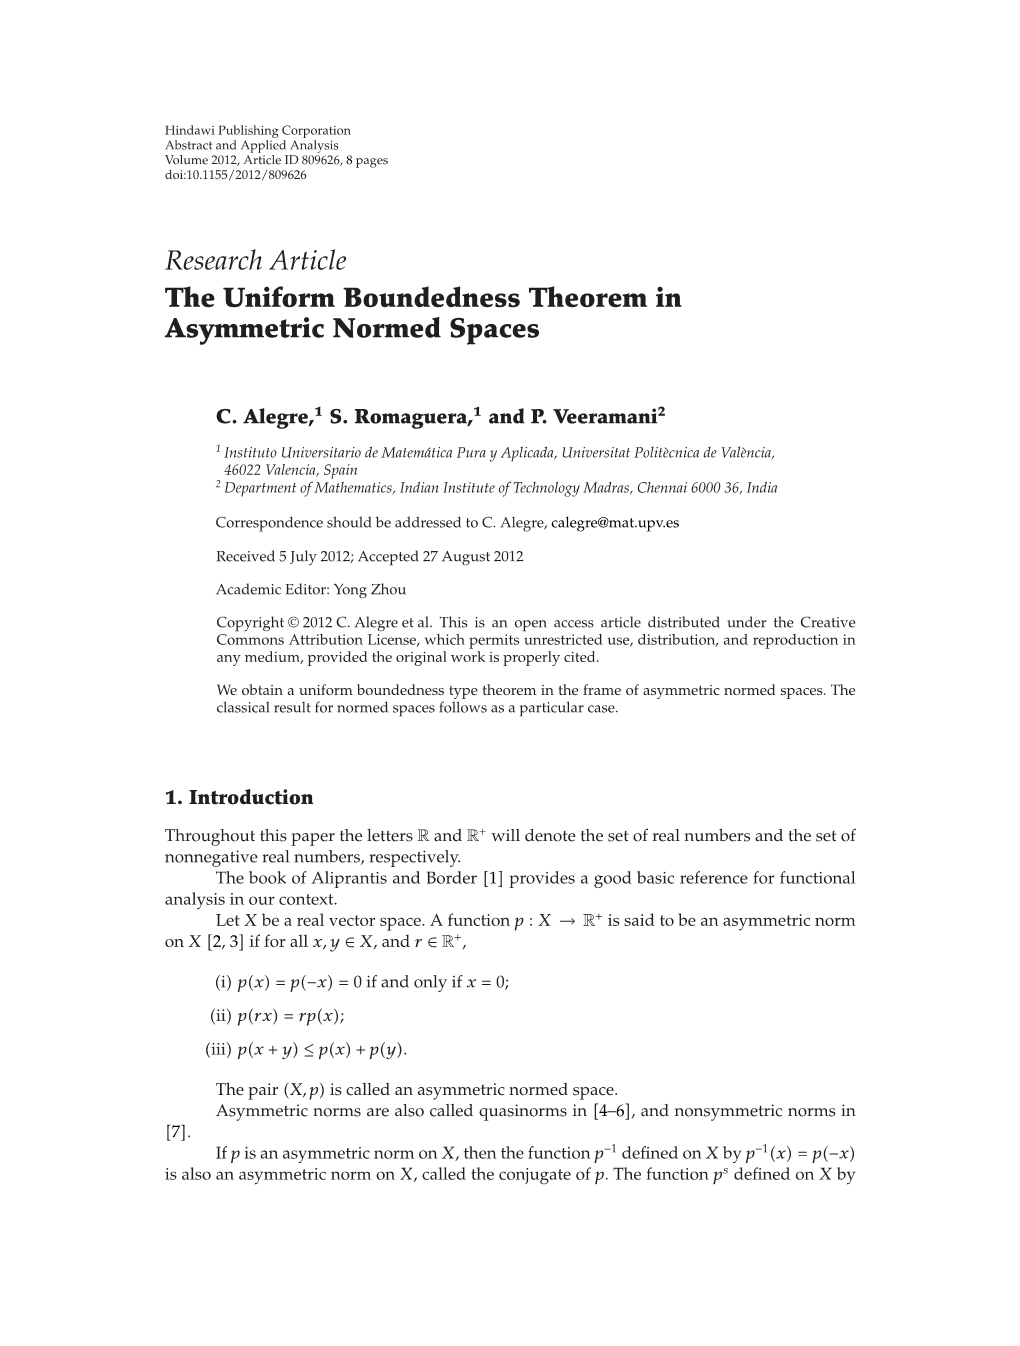 The Uniform Boundedness Theorem in Asymmetric Normed Spaces